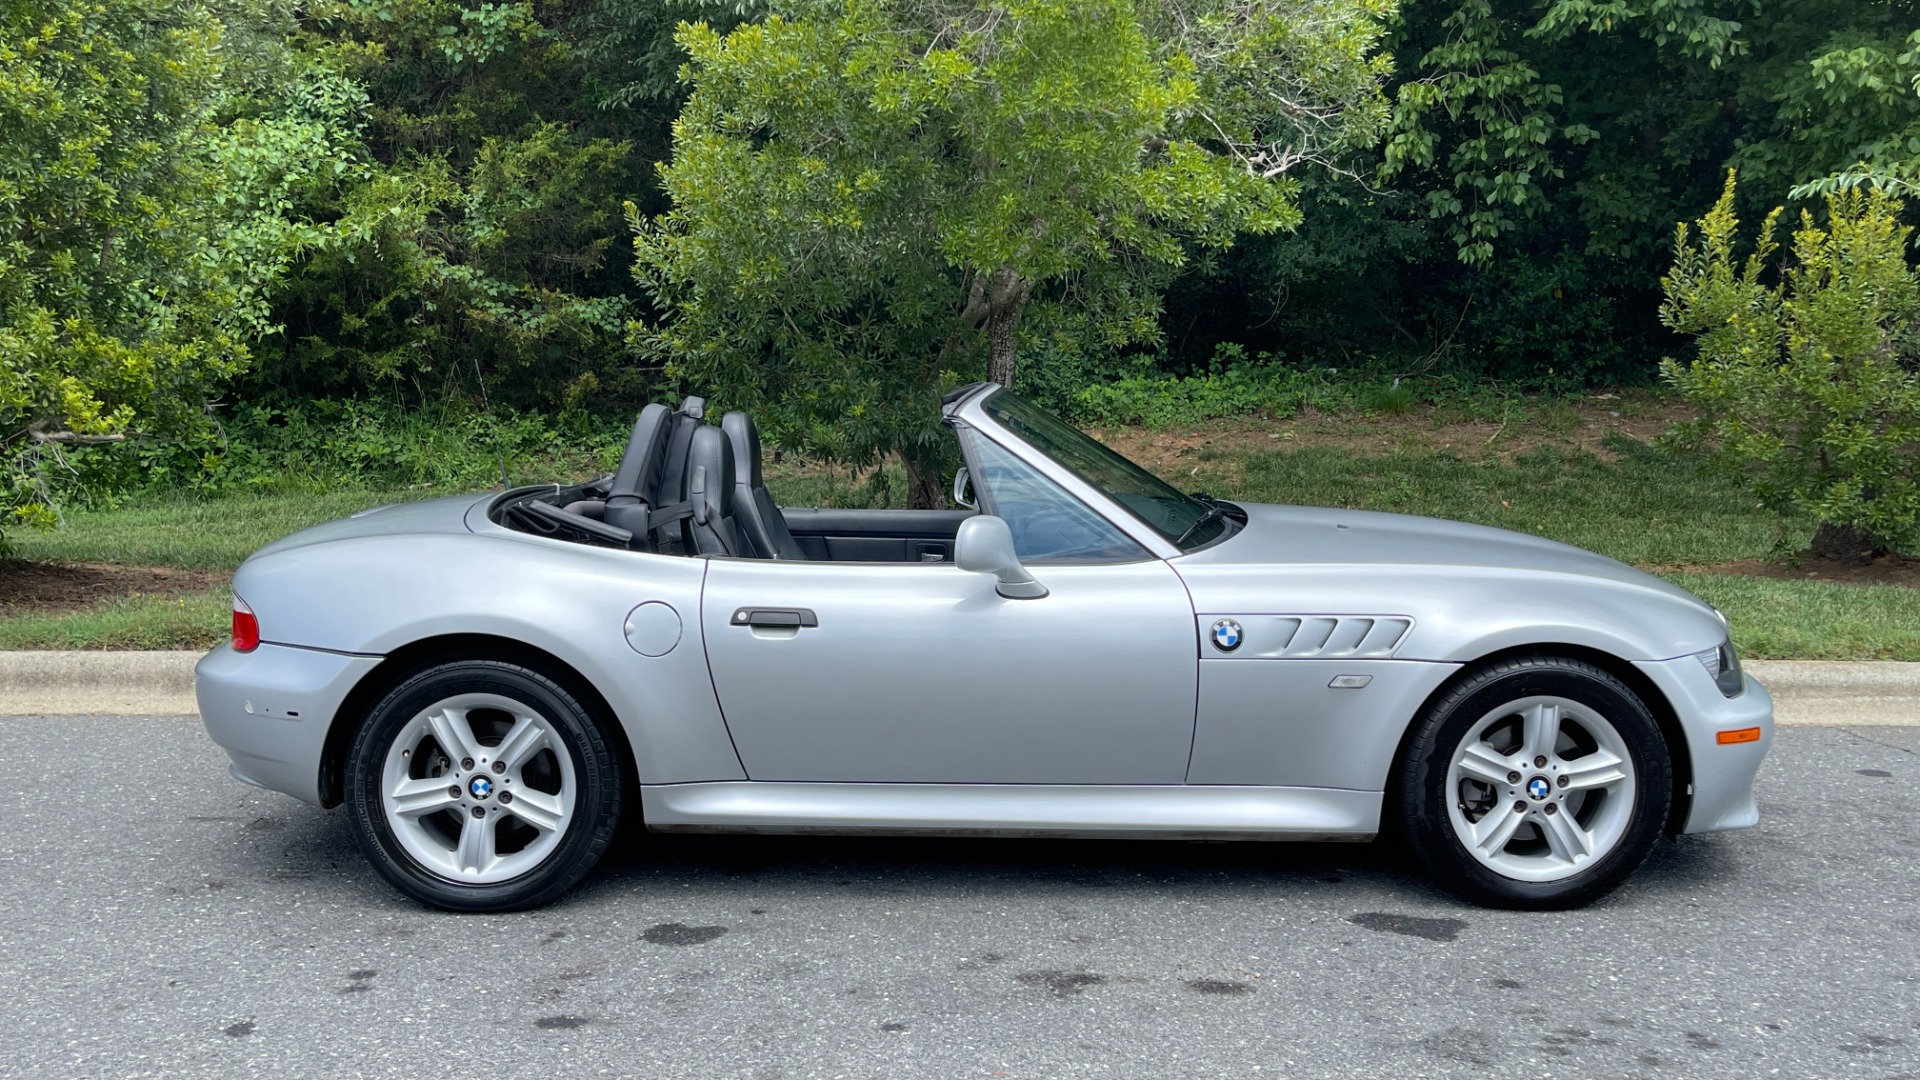 Used 2000 BMW Z3 2.5L / CONVERTIBLE / PWR TOP / AUTOMATIC / HEATED SEATS / LEATHER for sale $12,995 at Formula Imports in Charlotte NC 28227 7